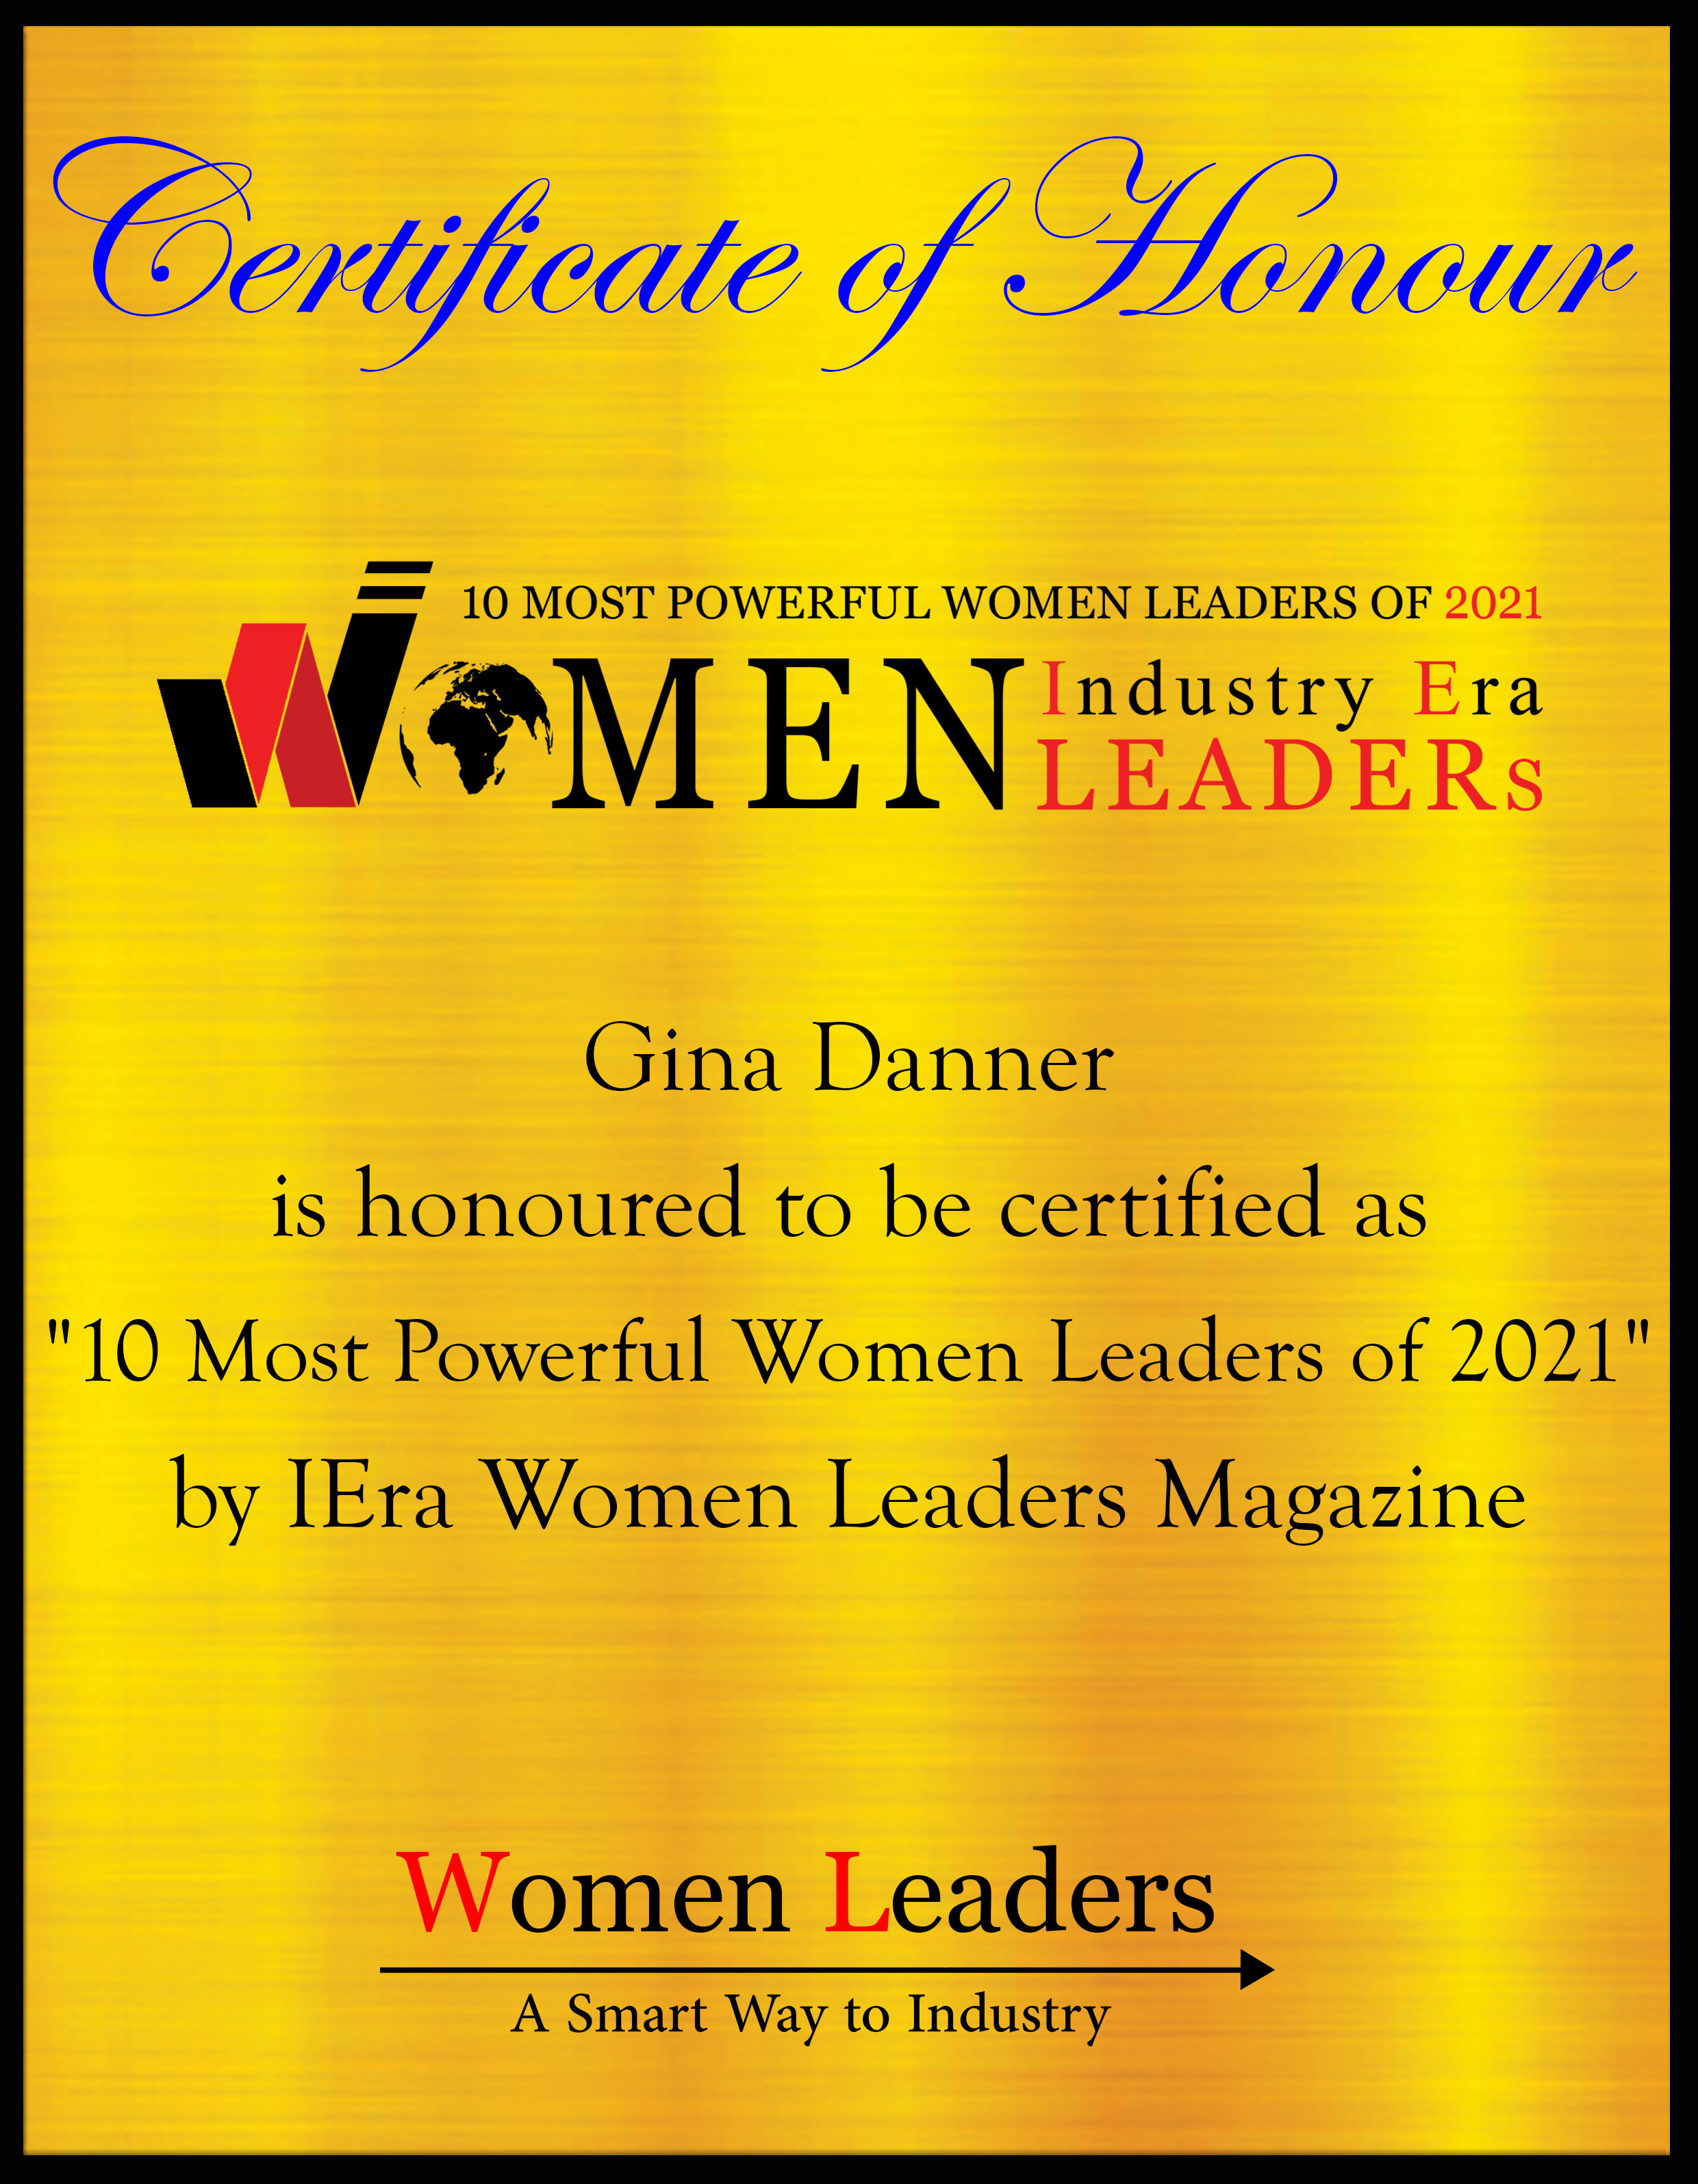 Gina Danner, Owner & CEO of NextPage, 10 Most Powerful Women Leaders of 2021